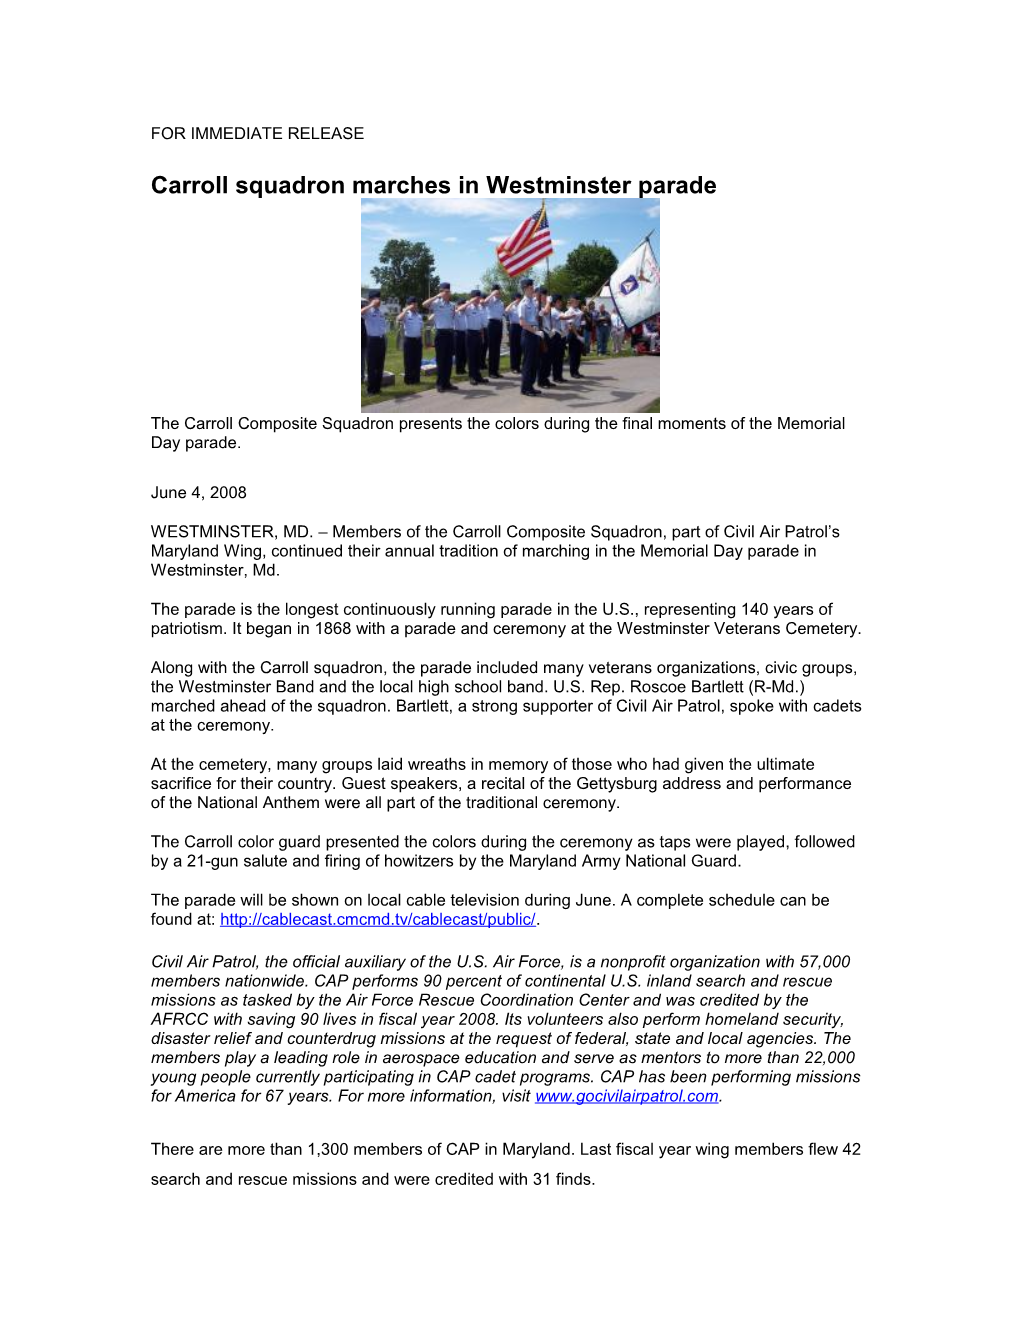 Carroll Squadron Marches in Westminster Parade